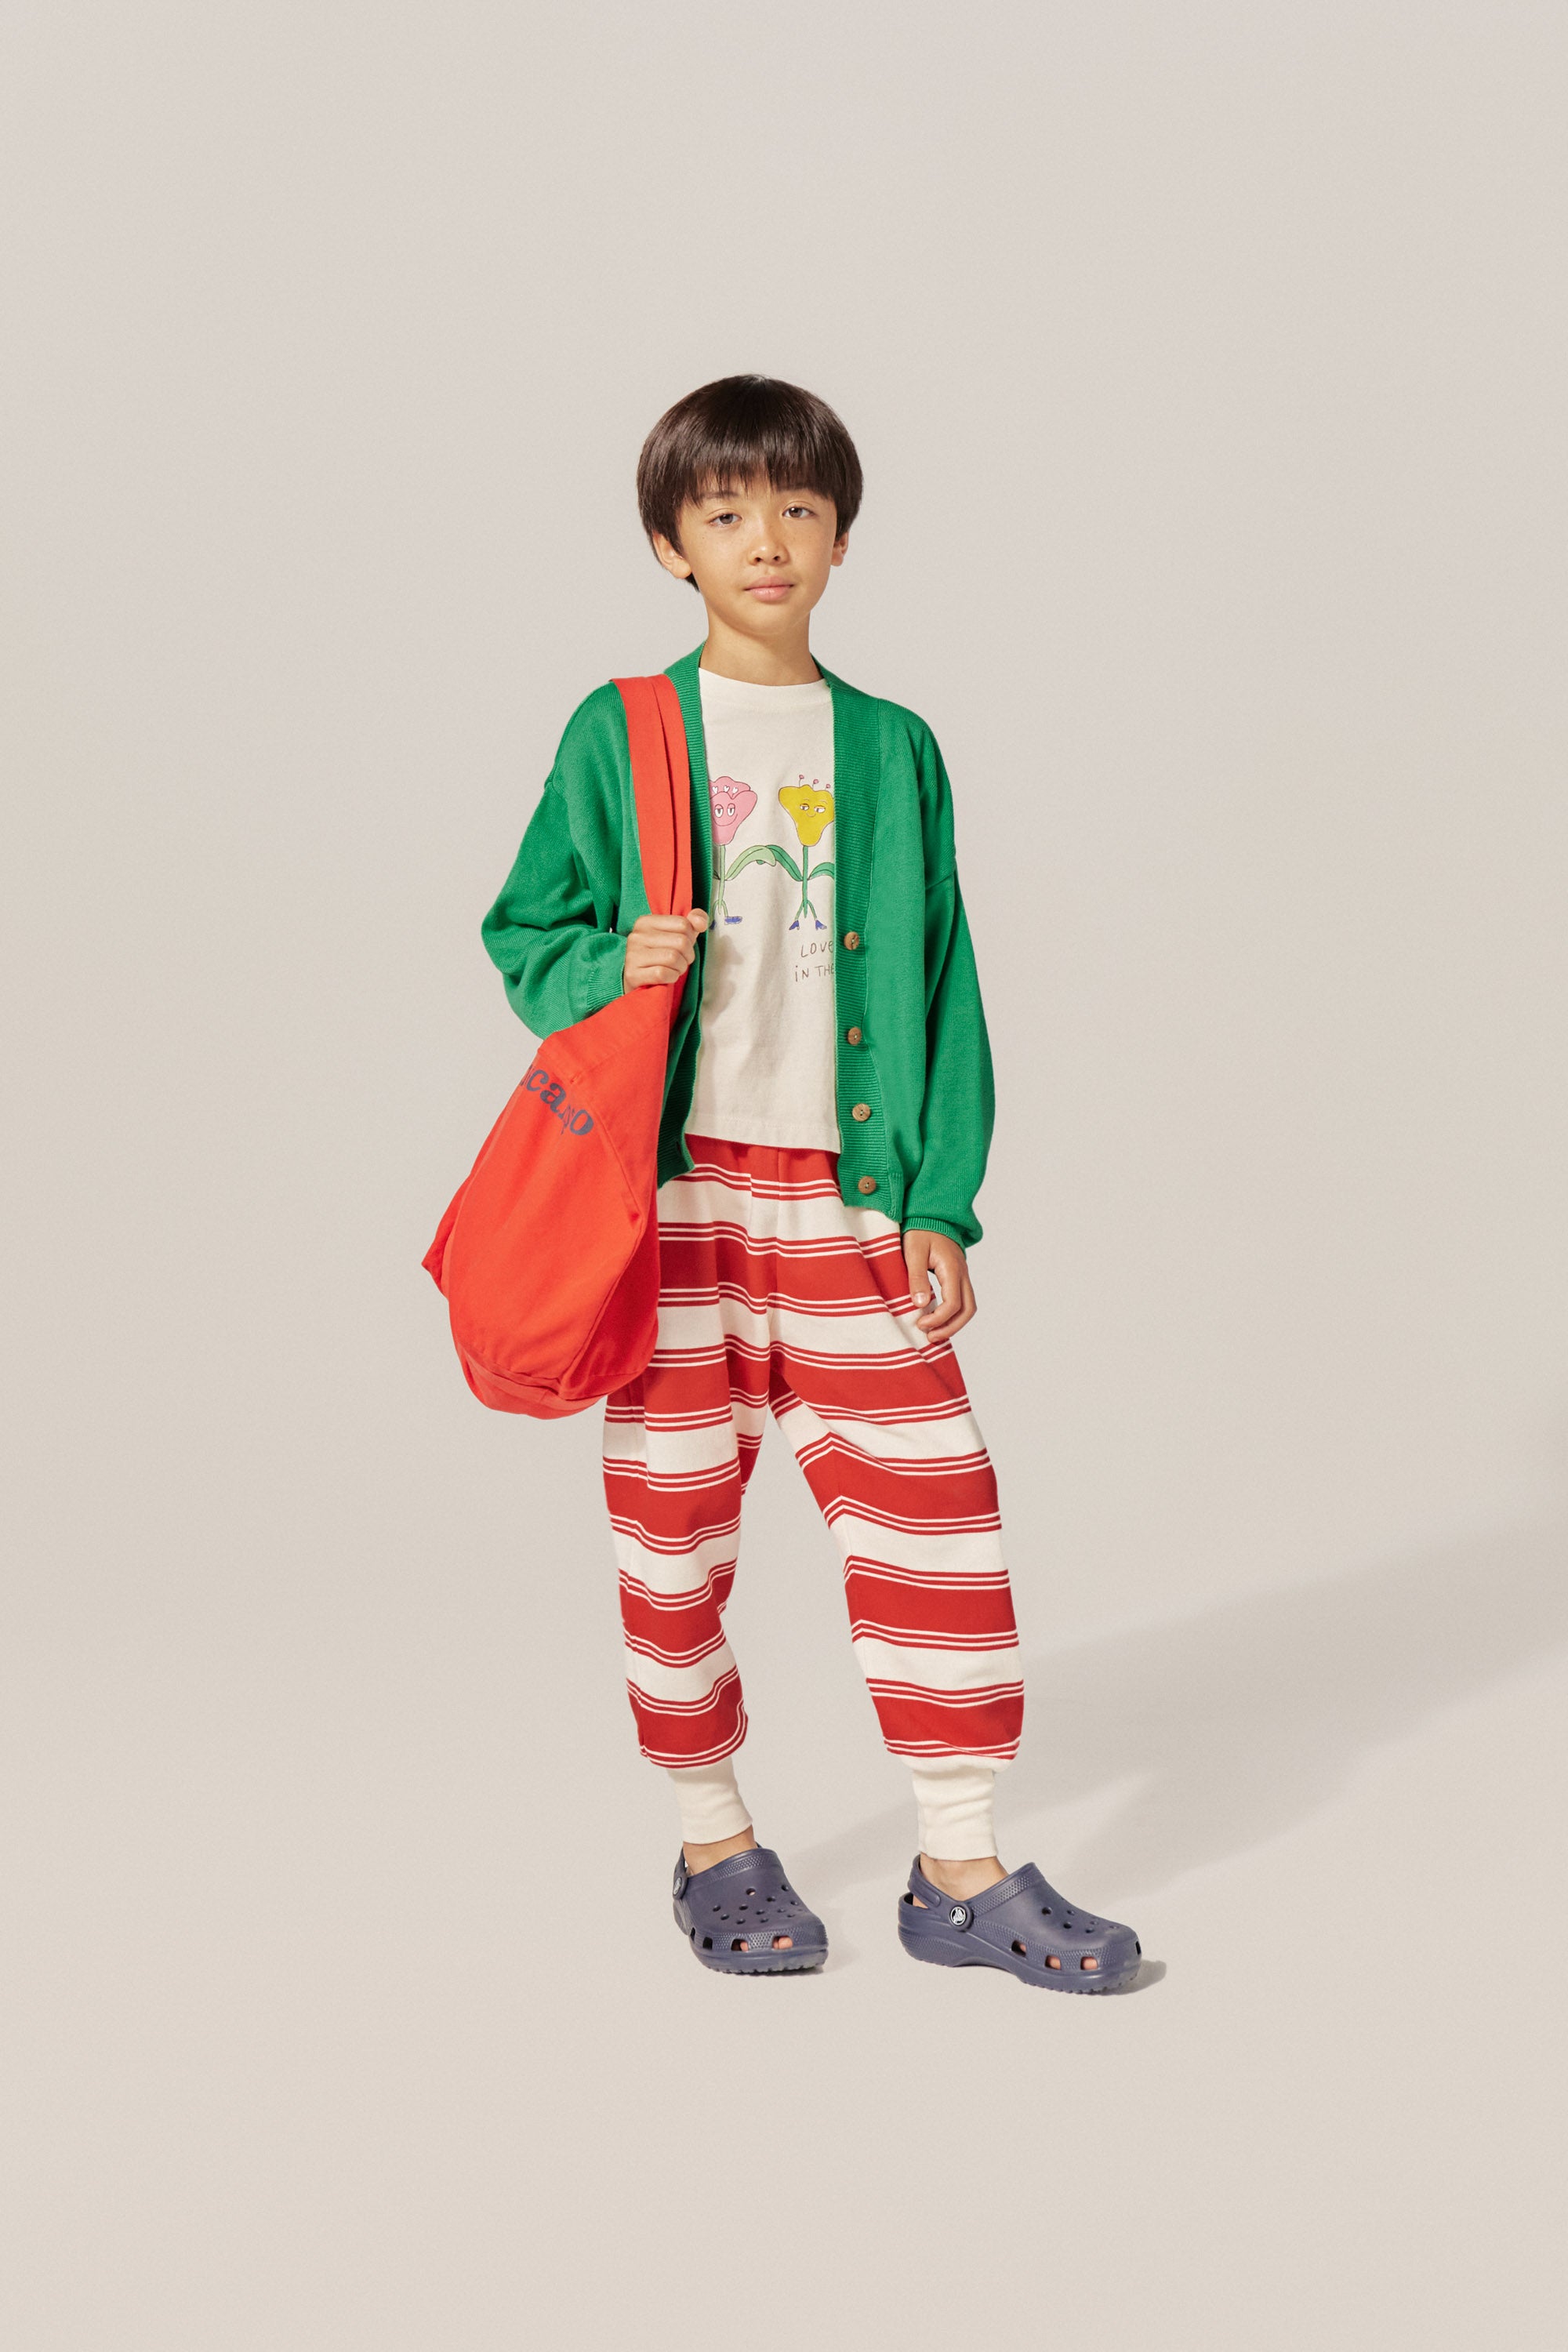 RED STRIPES KIDS JOGGING TROUSERS